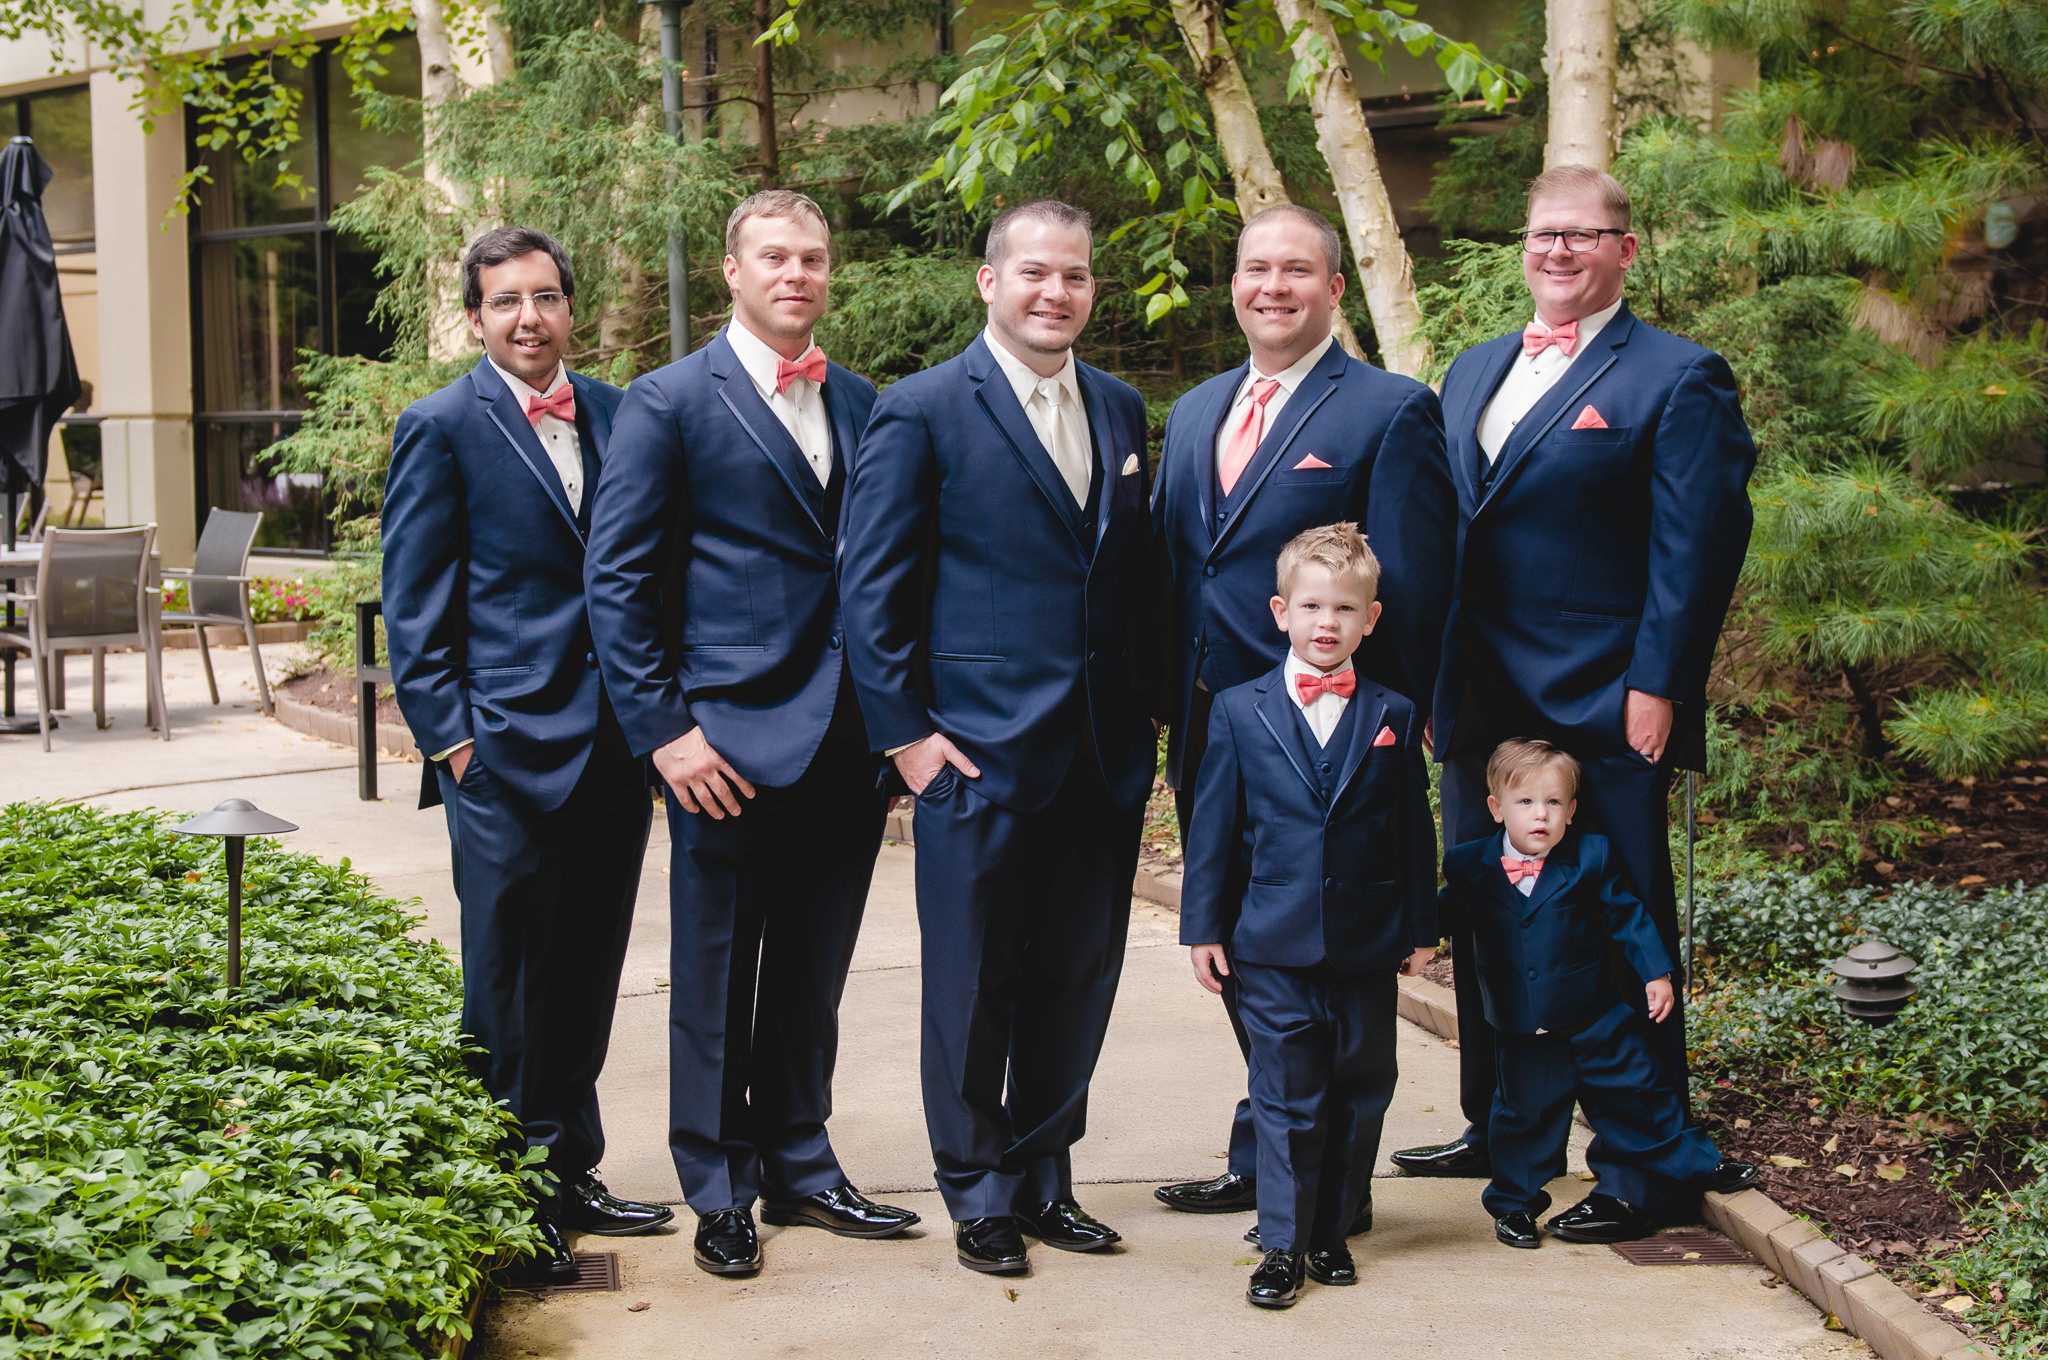 Groom poses with his groomsmen and ring bearers in the courtyard of the Pittsburgh Airport Marriott